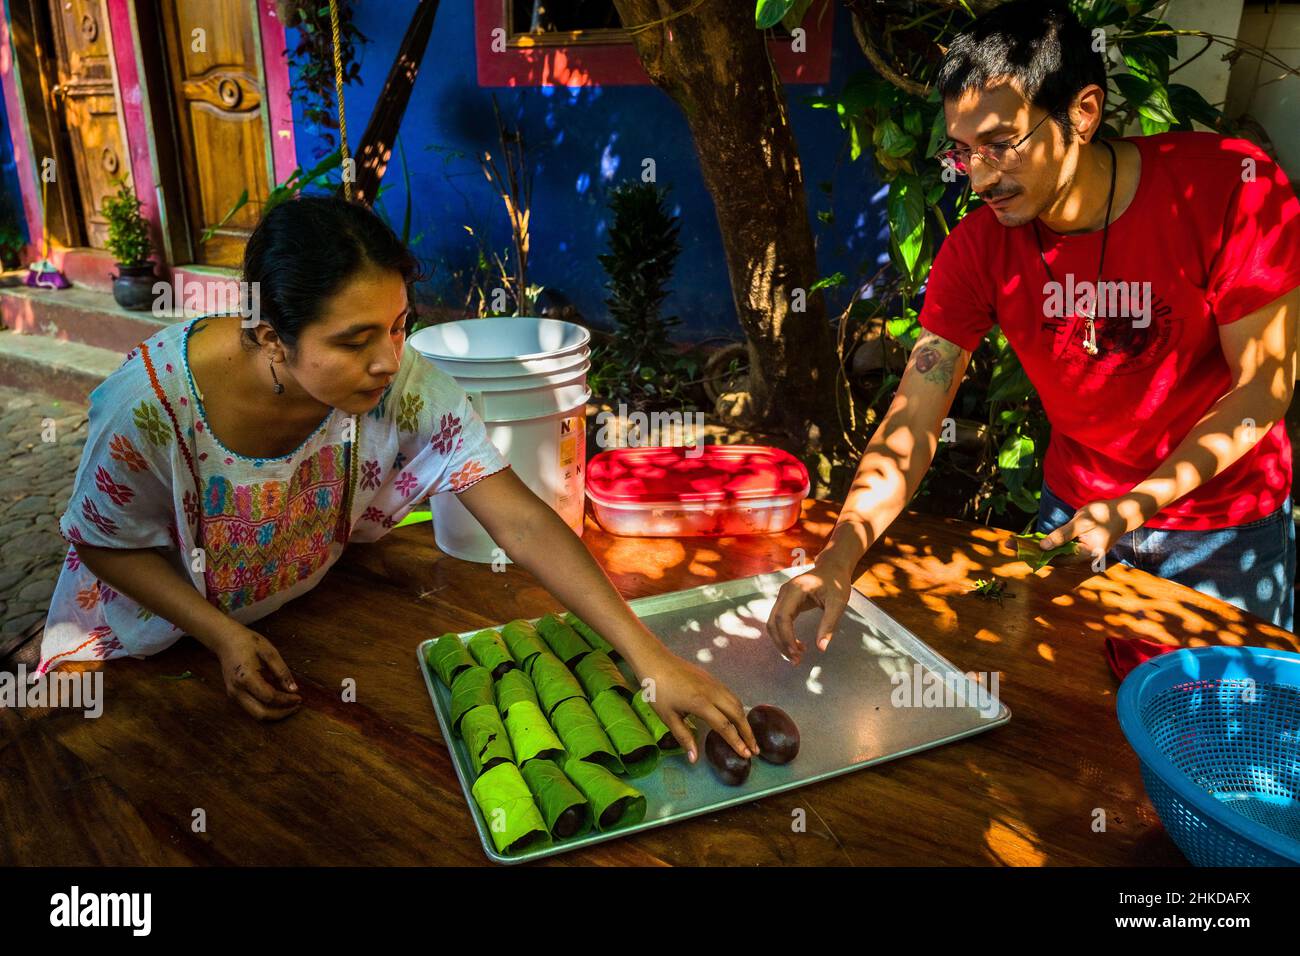 An indigenous woman, with her husband, wraps chocolate balls made of raw cacao paste in artisanal chocolate manufacture in Xochistlahuaca, Mexico. Stock Photo